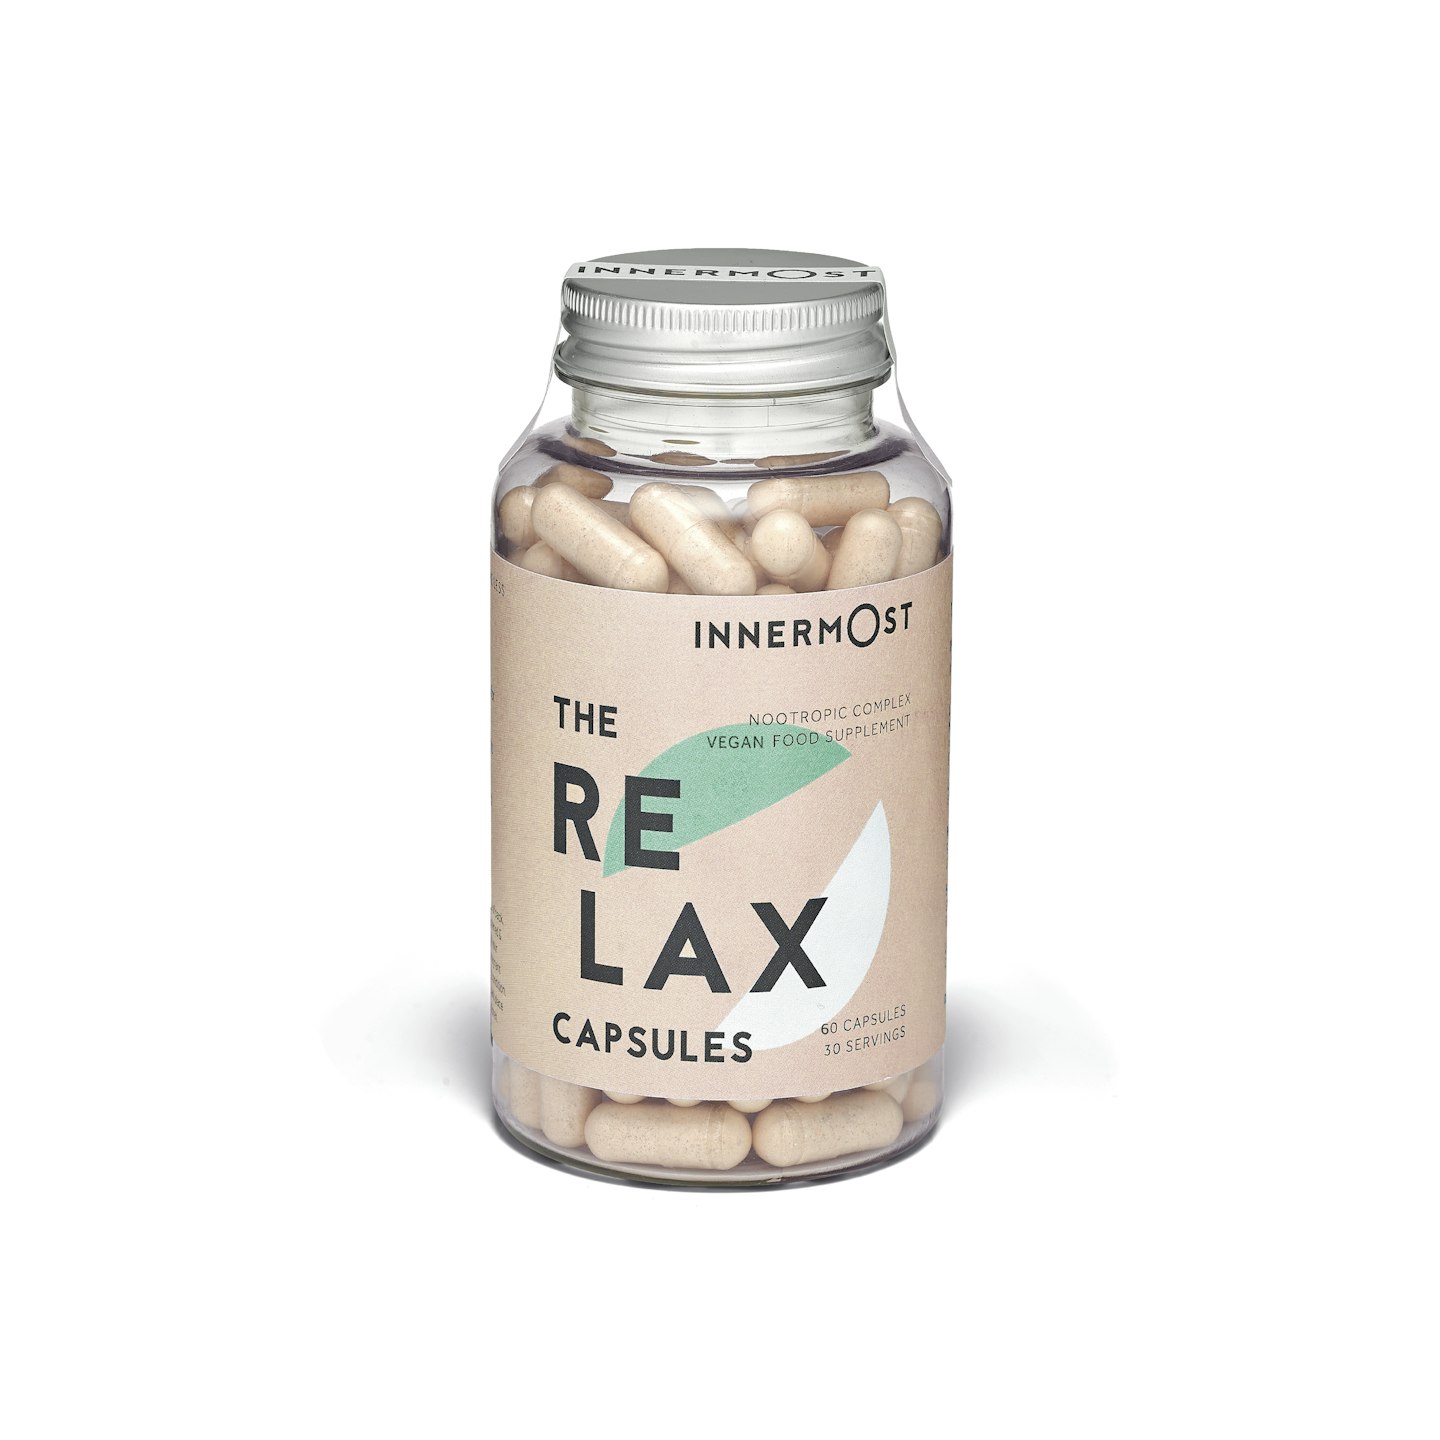 The Relax Capsules